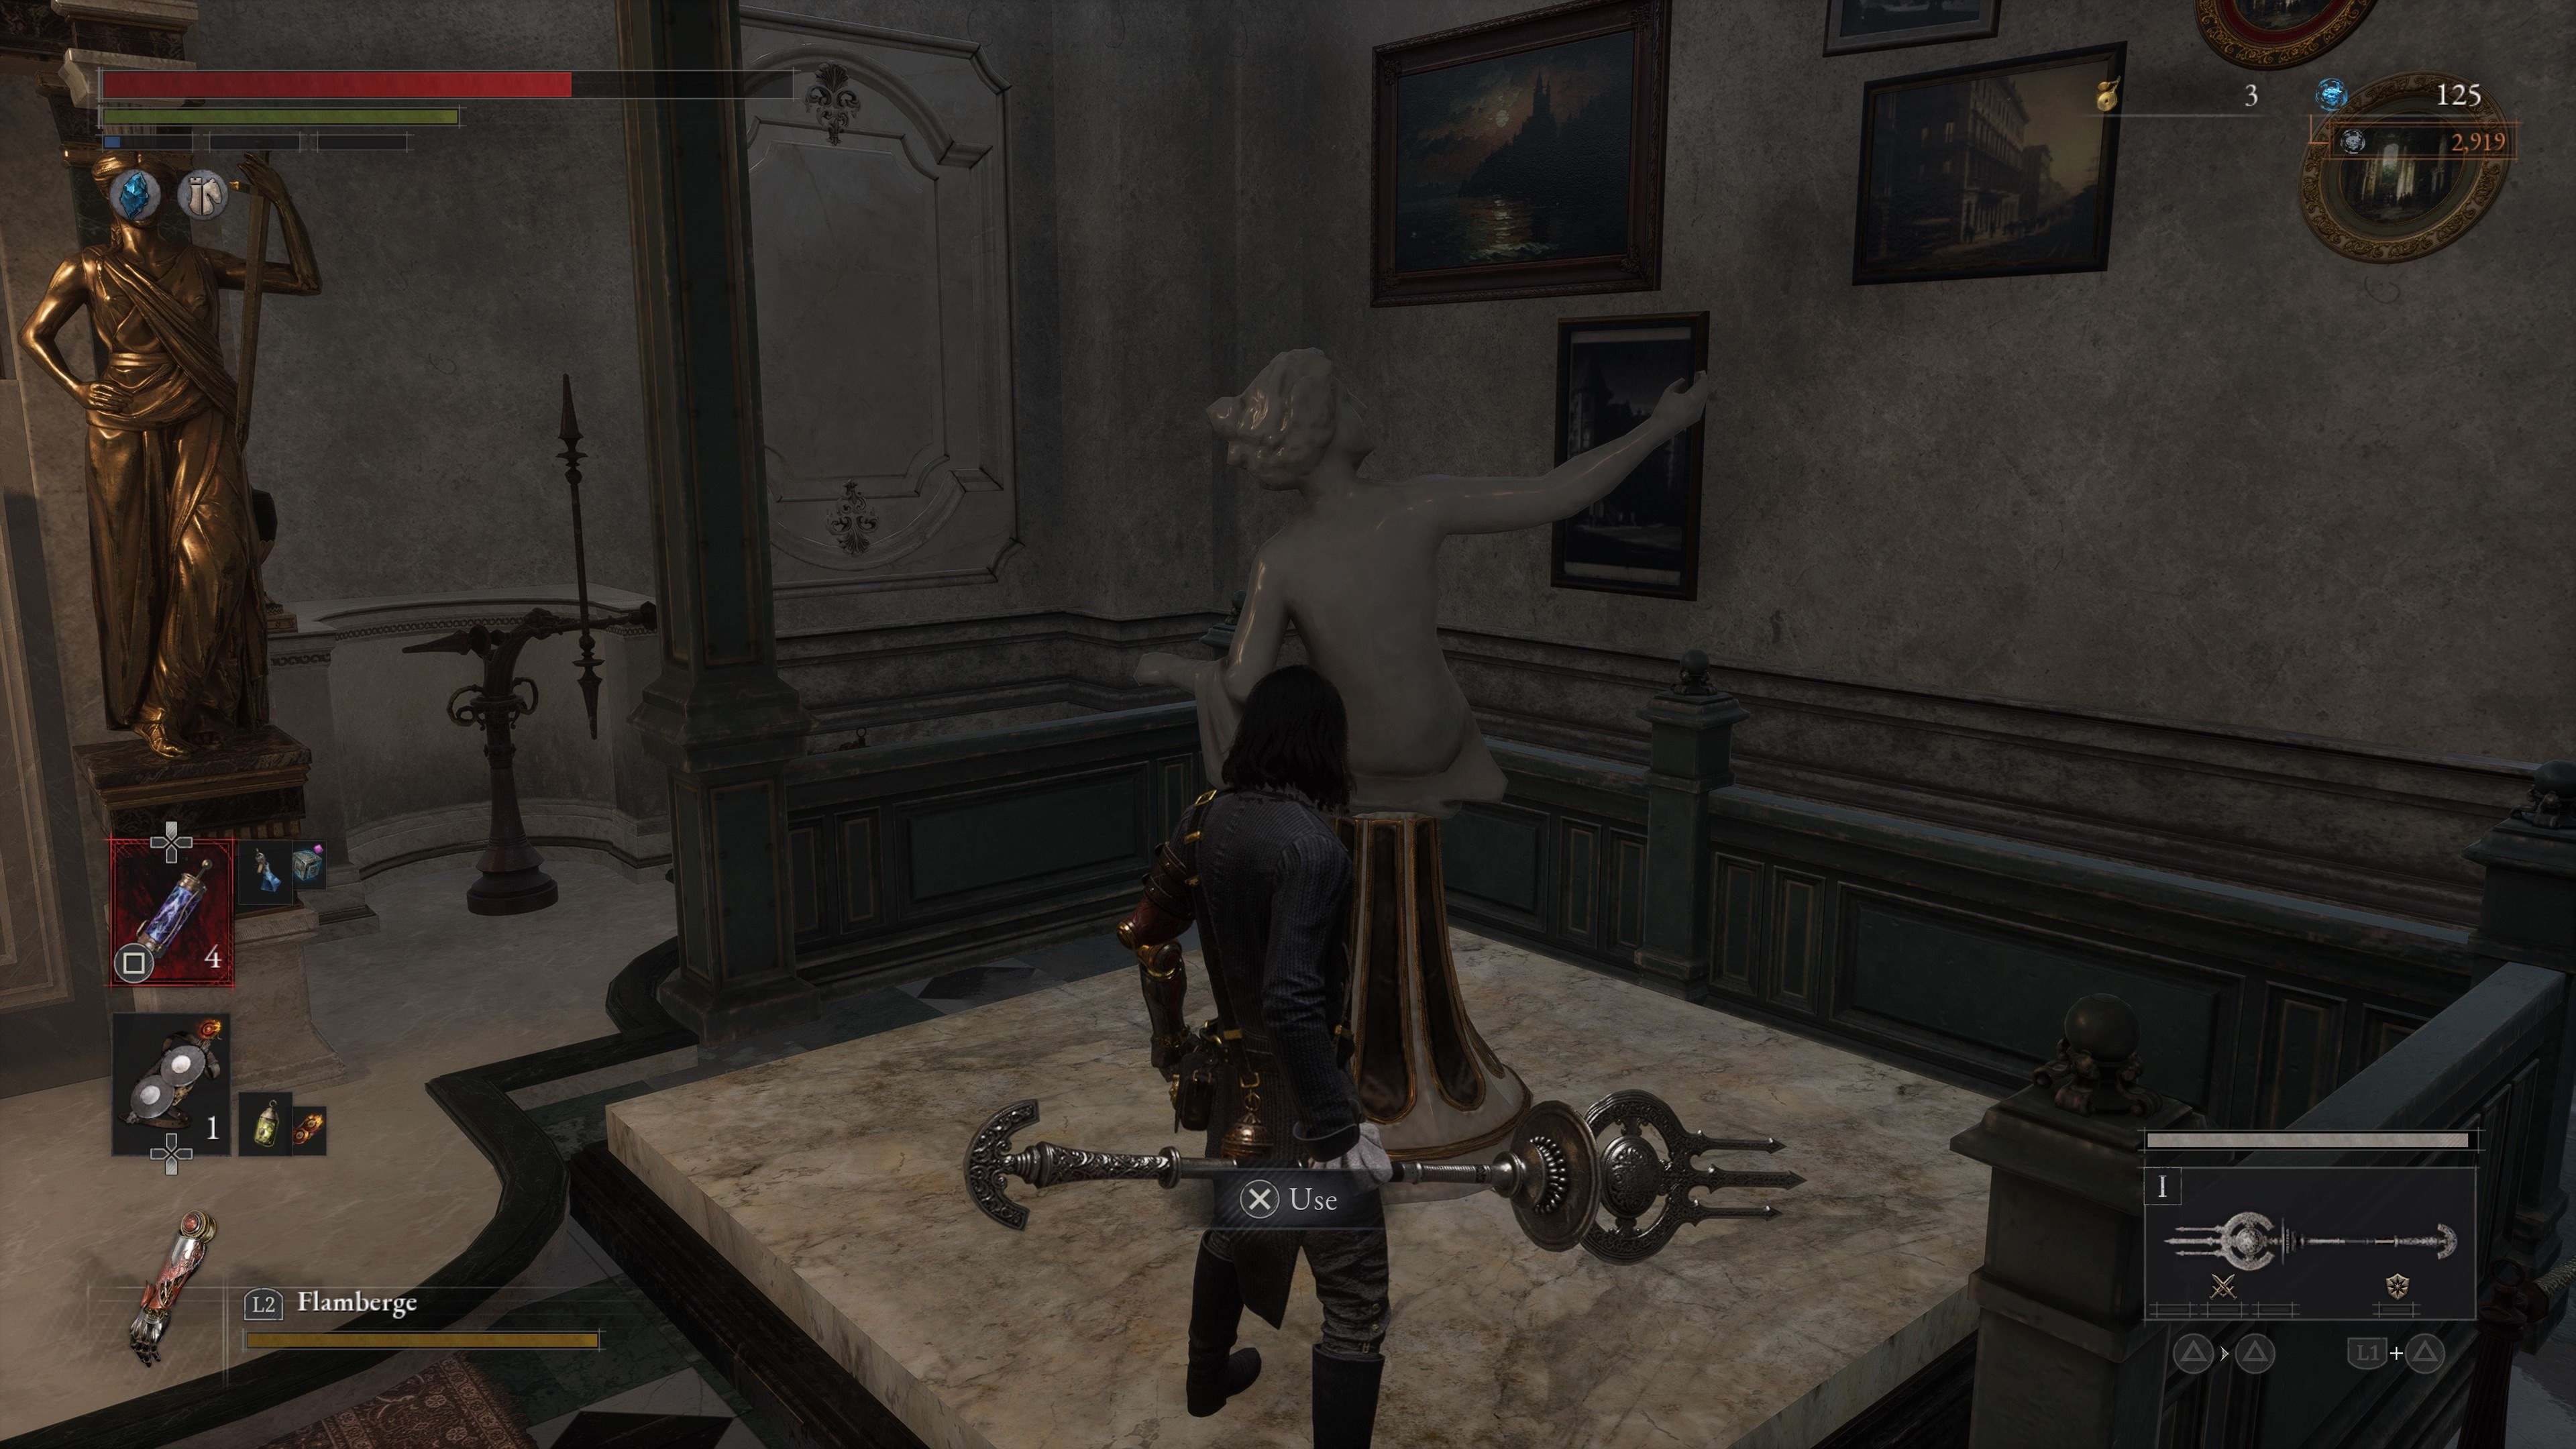 Interacting with the cold woman statue in Lies of P